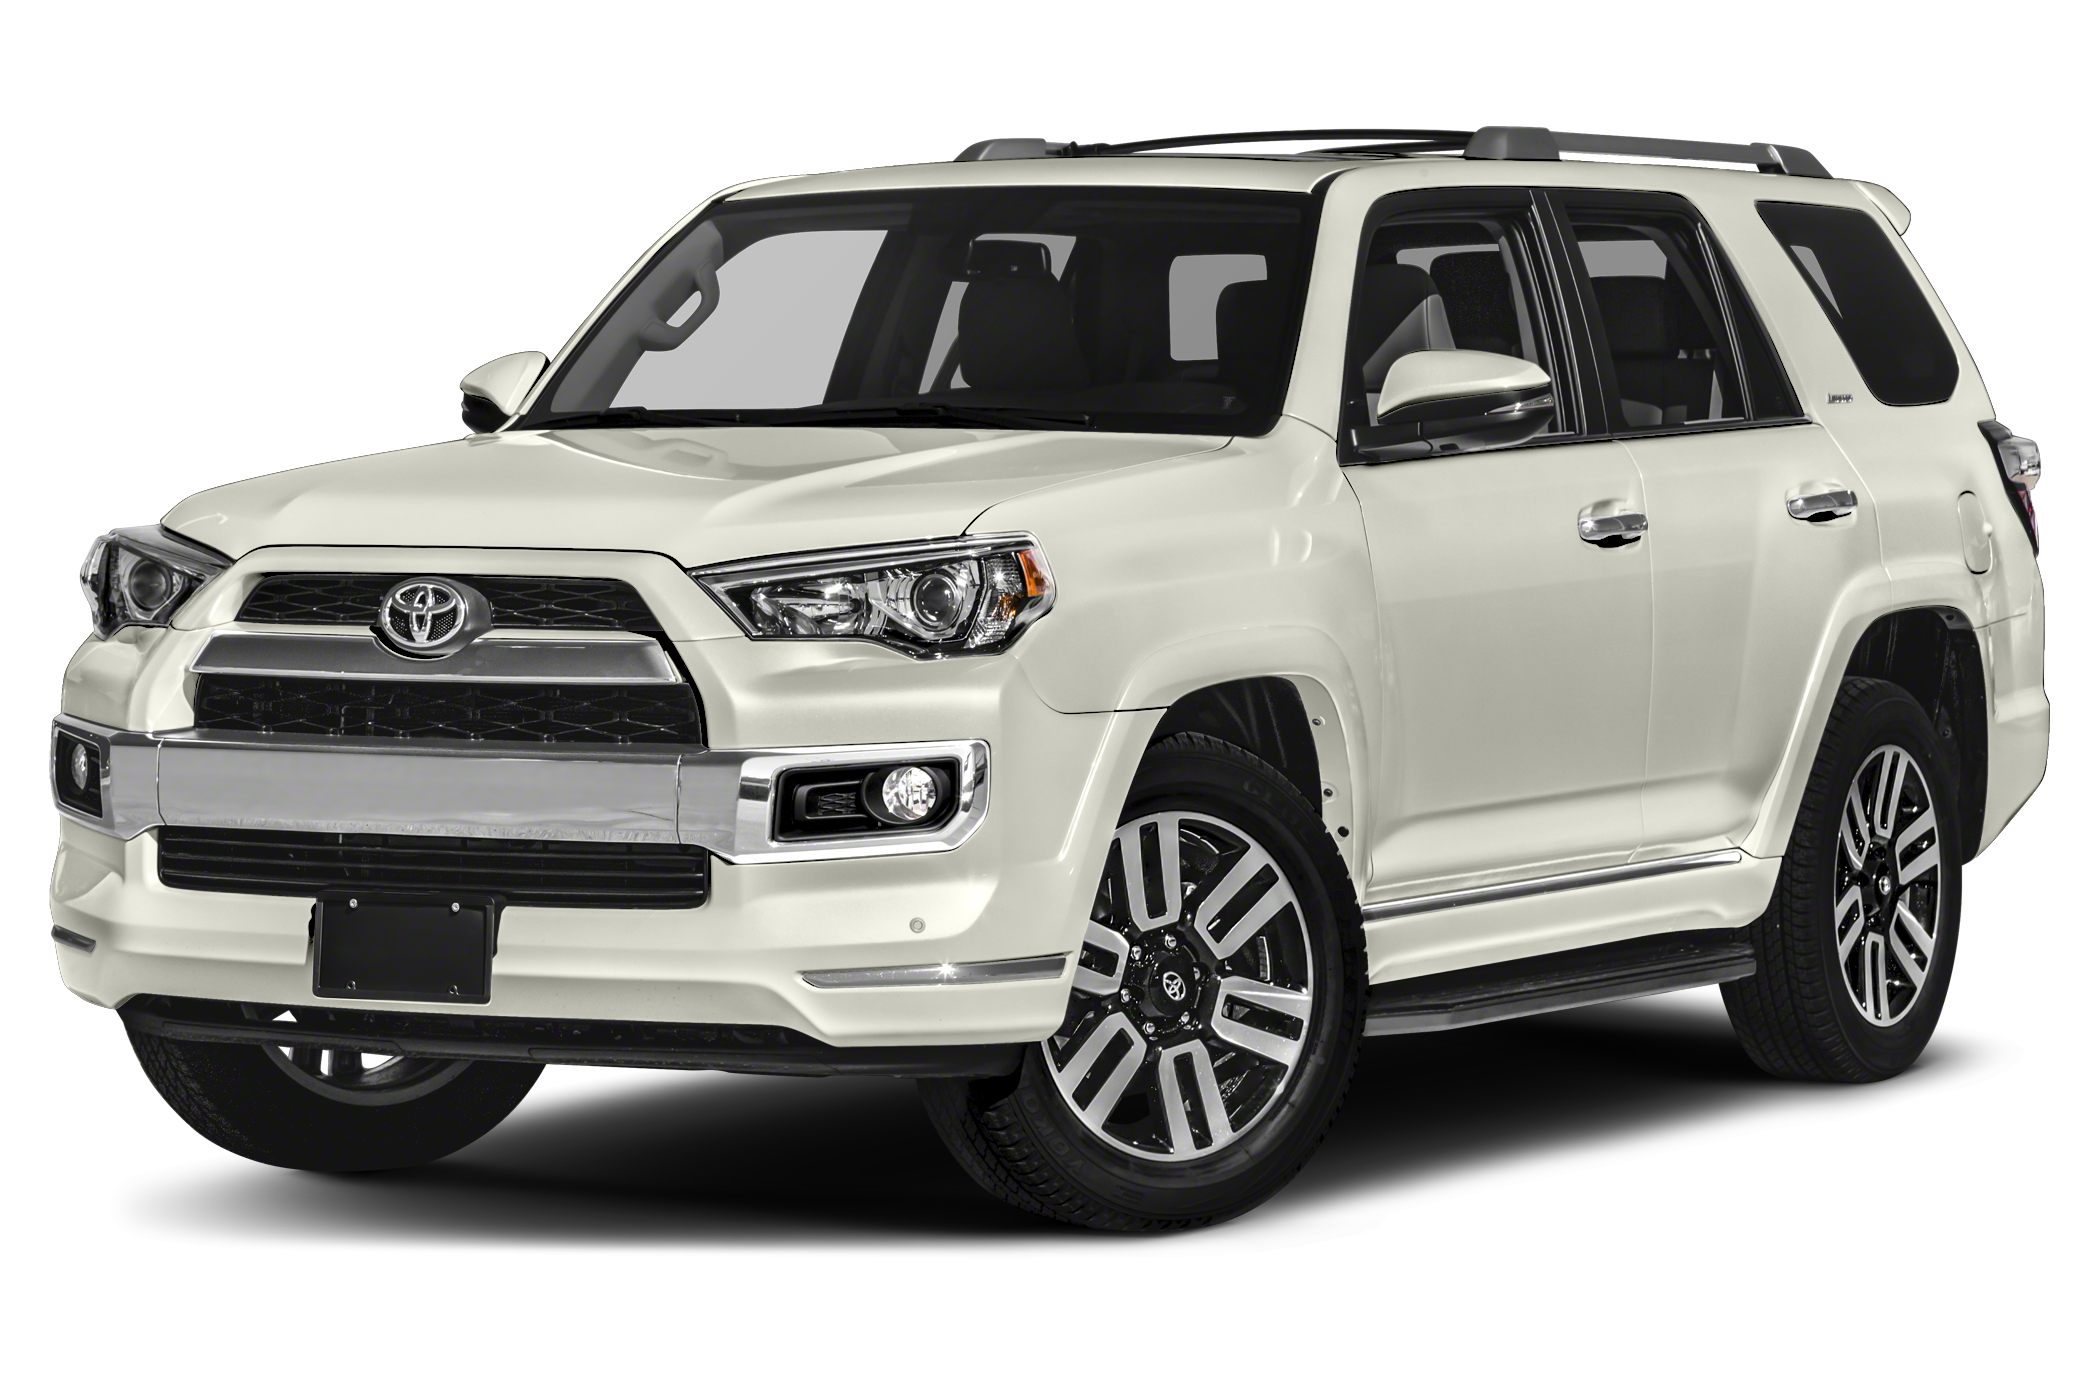 2019 Toyota 4Runner oem parts and accessories on sale